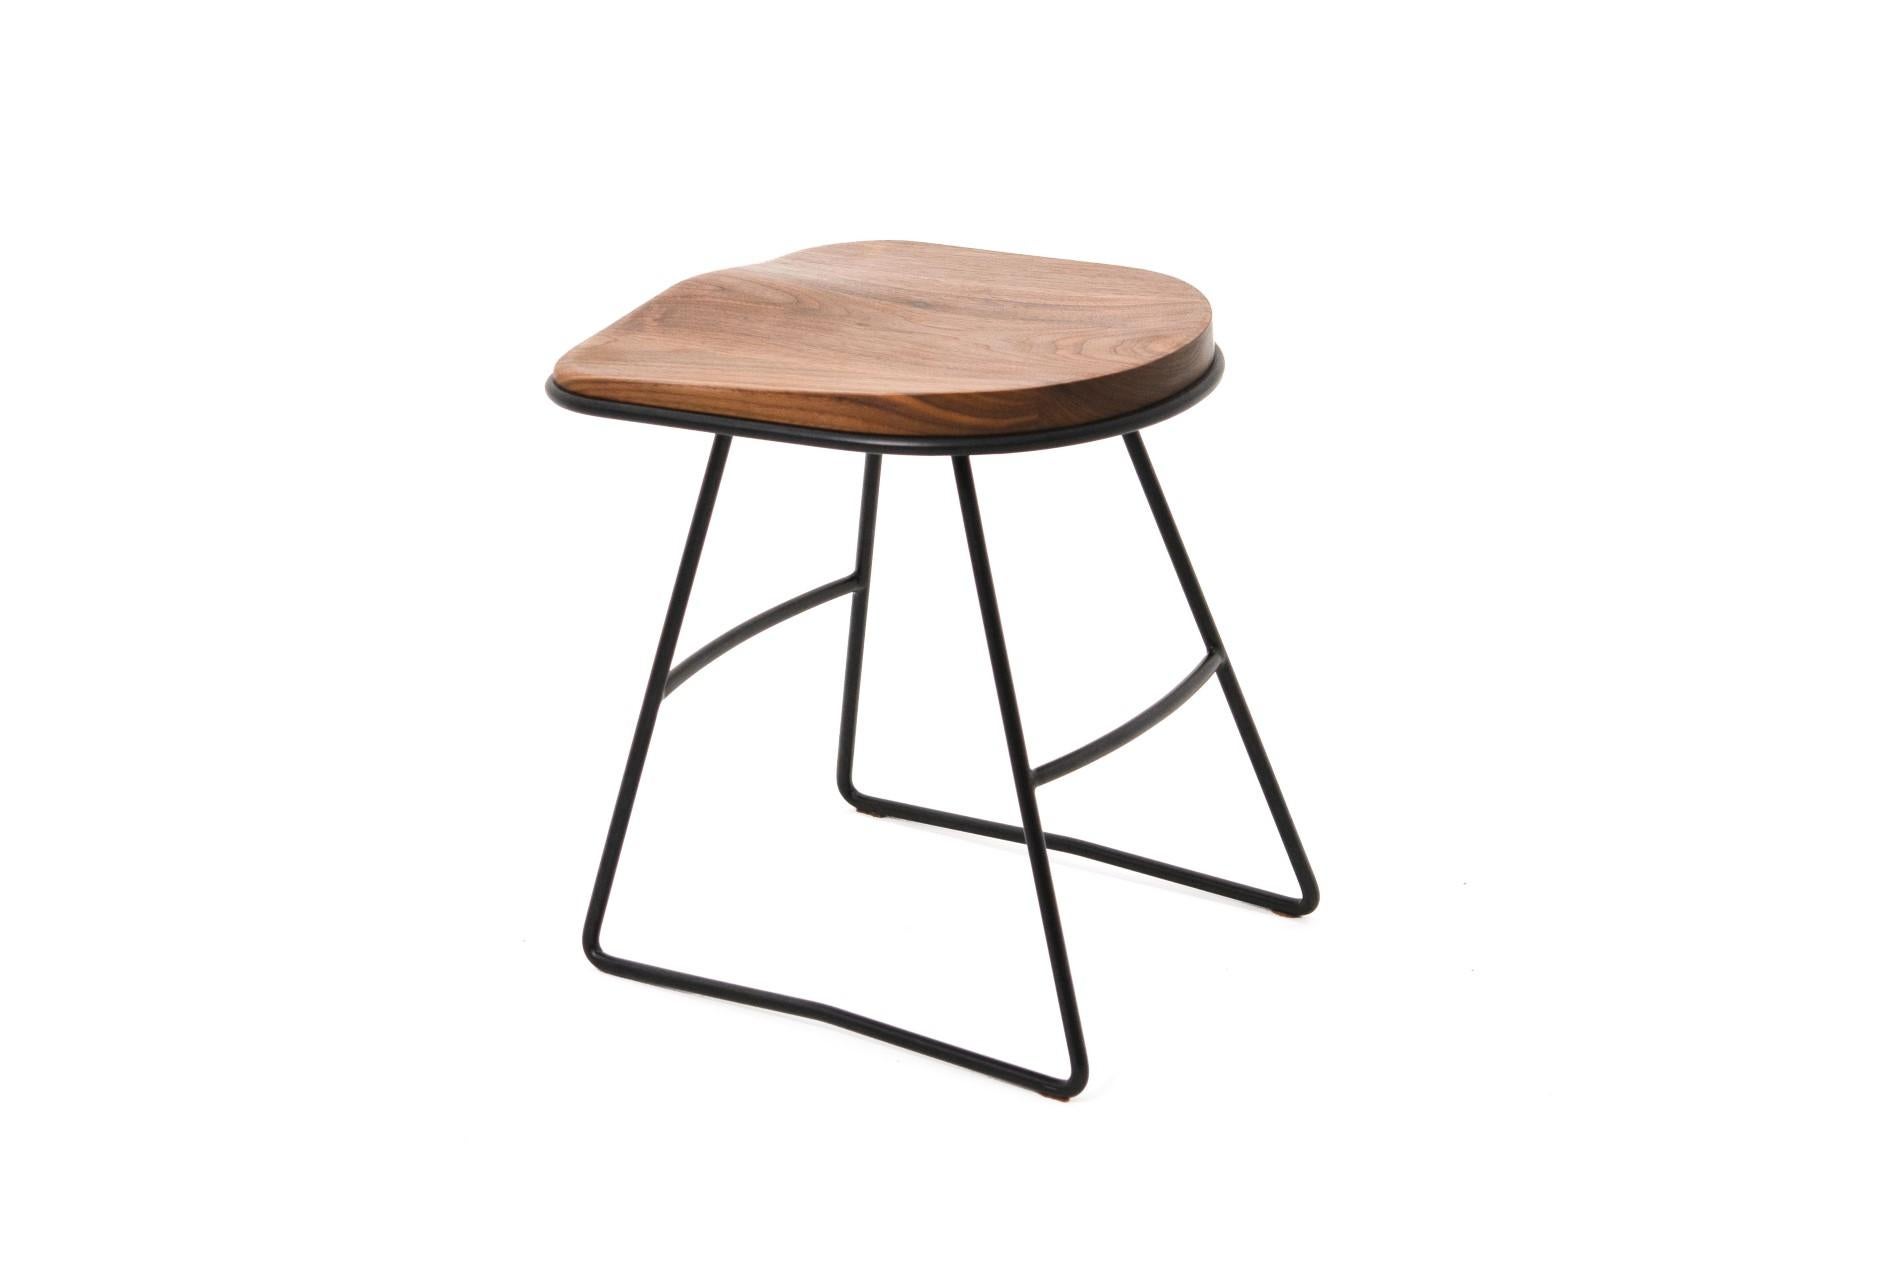 Pug Occasional Stool, Solid Shaped Walnut Seat in Hand Bent Steel Frame In Excellent Condition For Sale In beirut, LB